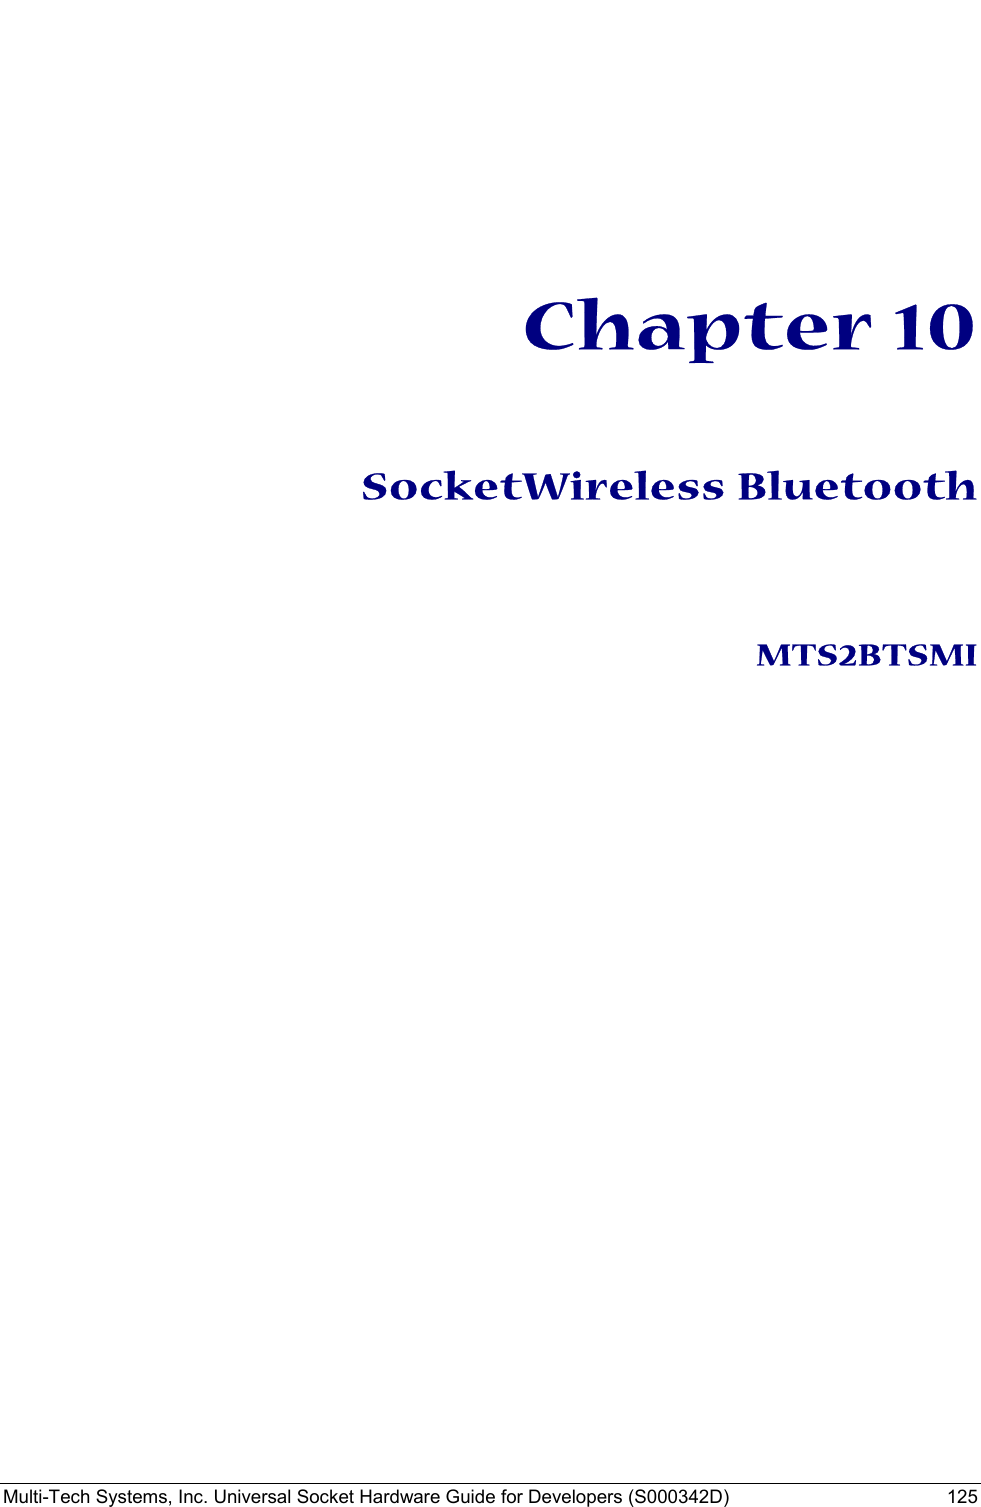  Multi-Tech Systems, Inc. Universal Socket Hardware Guide for Developers (S000342D)  125           Chapter 10    SocketWireless Bluetooth    MTS2BTSMI    